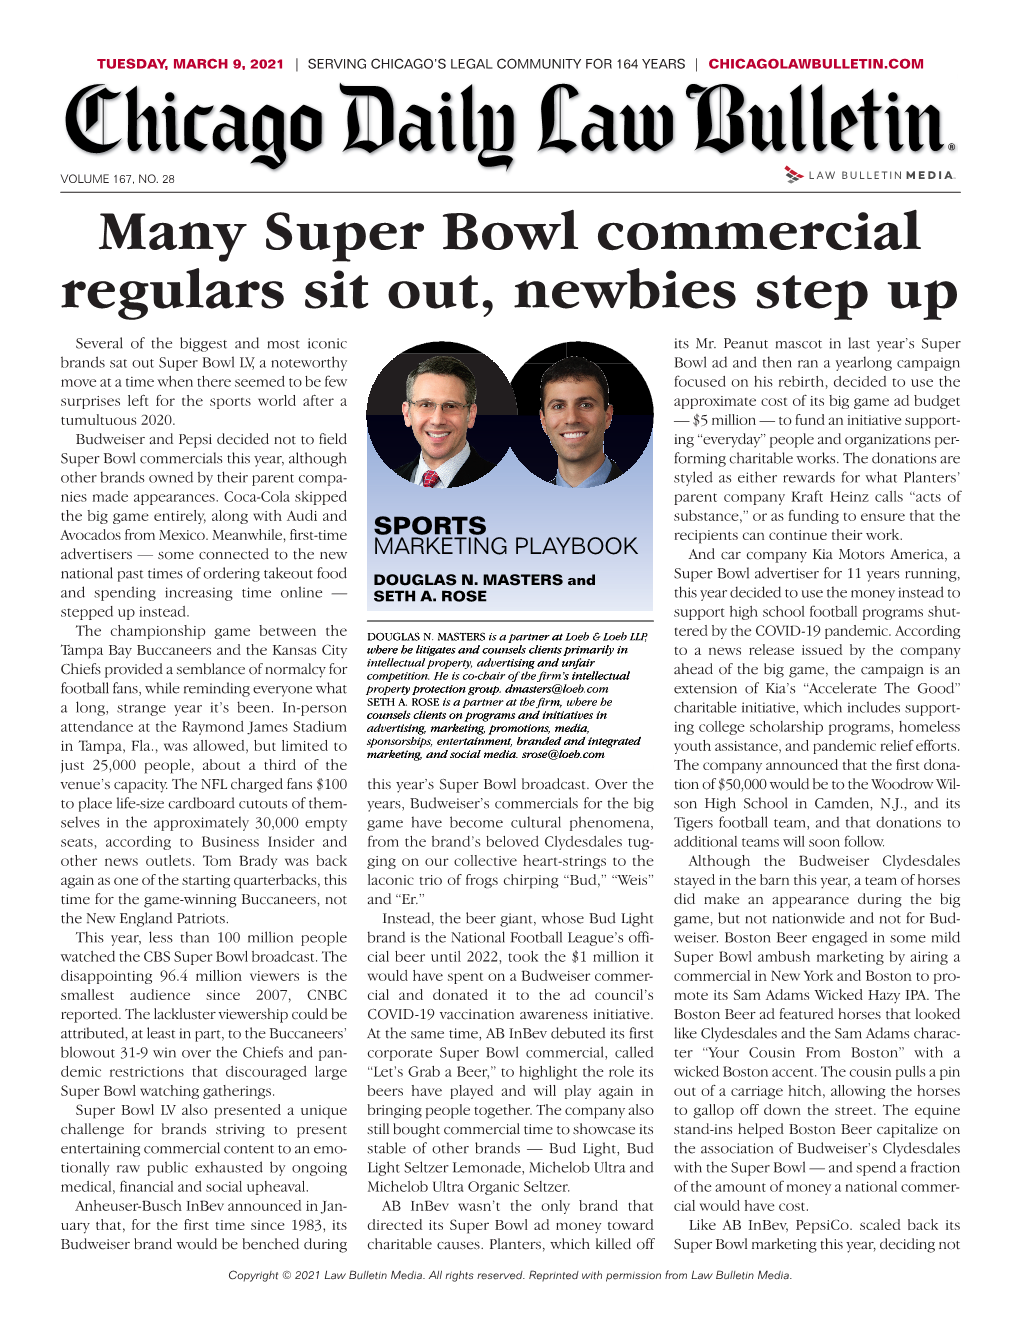 Many Super Bowl Commercial Regulars Sit Out, Newbies Step Up